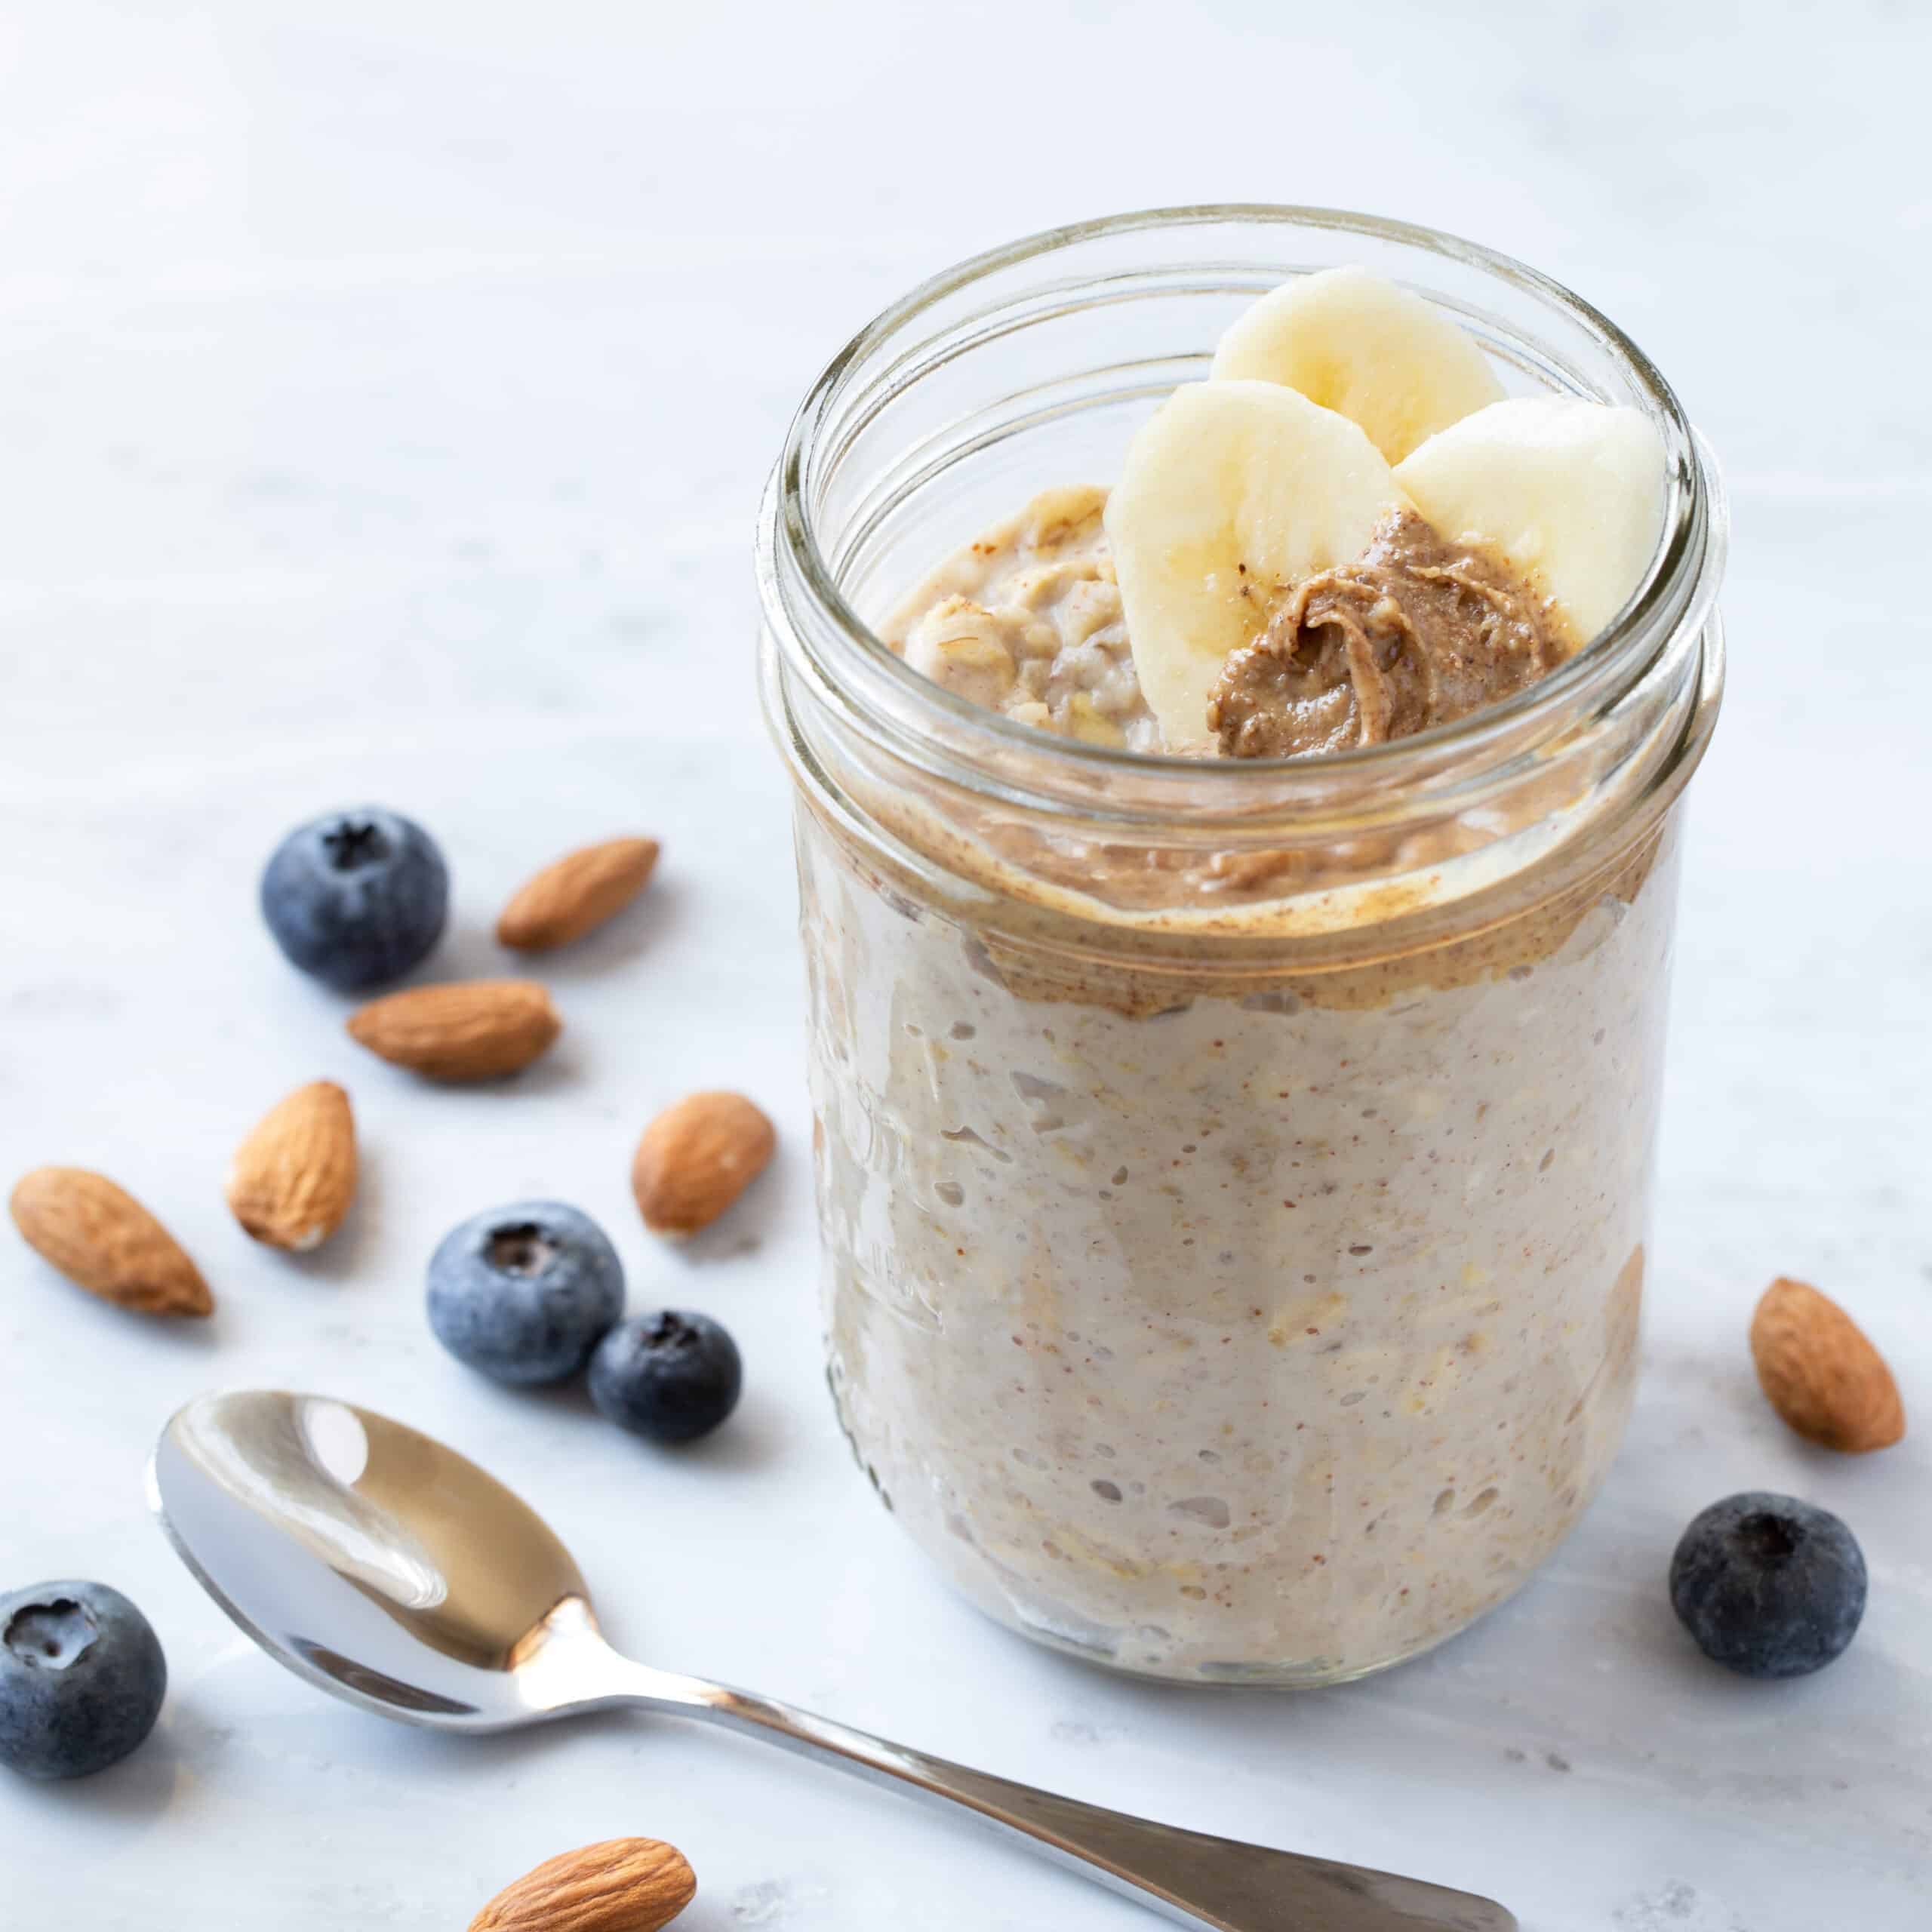 Homemade overnight oats in a jar with fruit